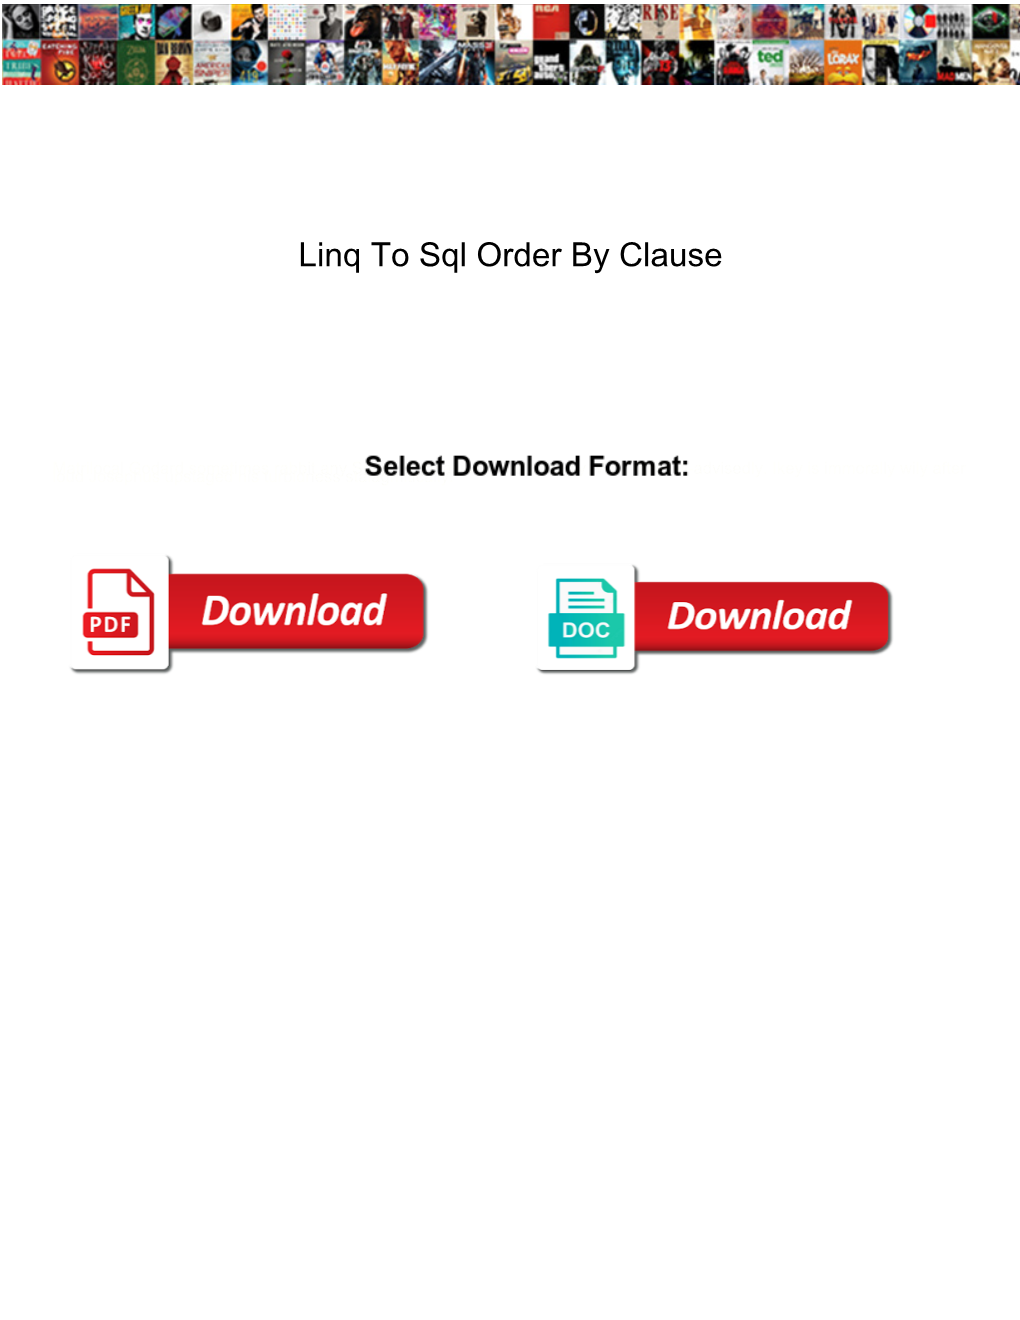 Linq to Sql Order by Clause